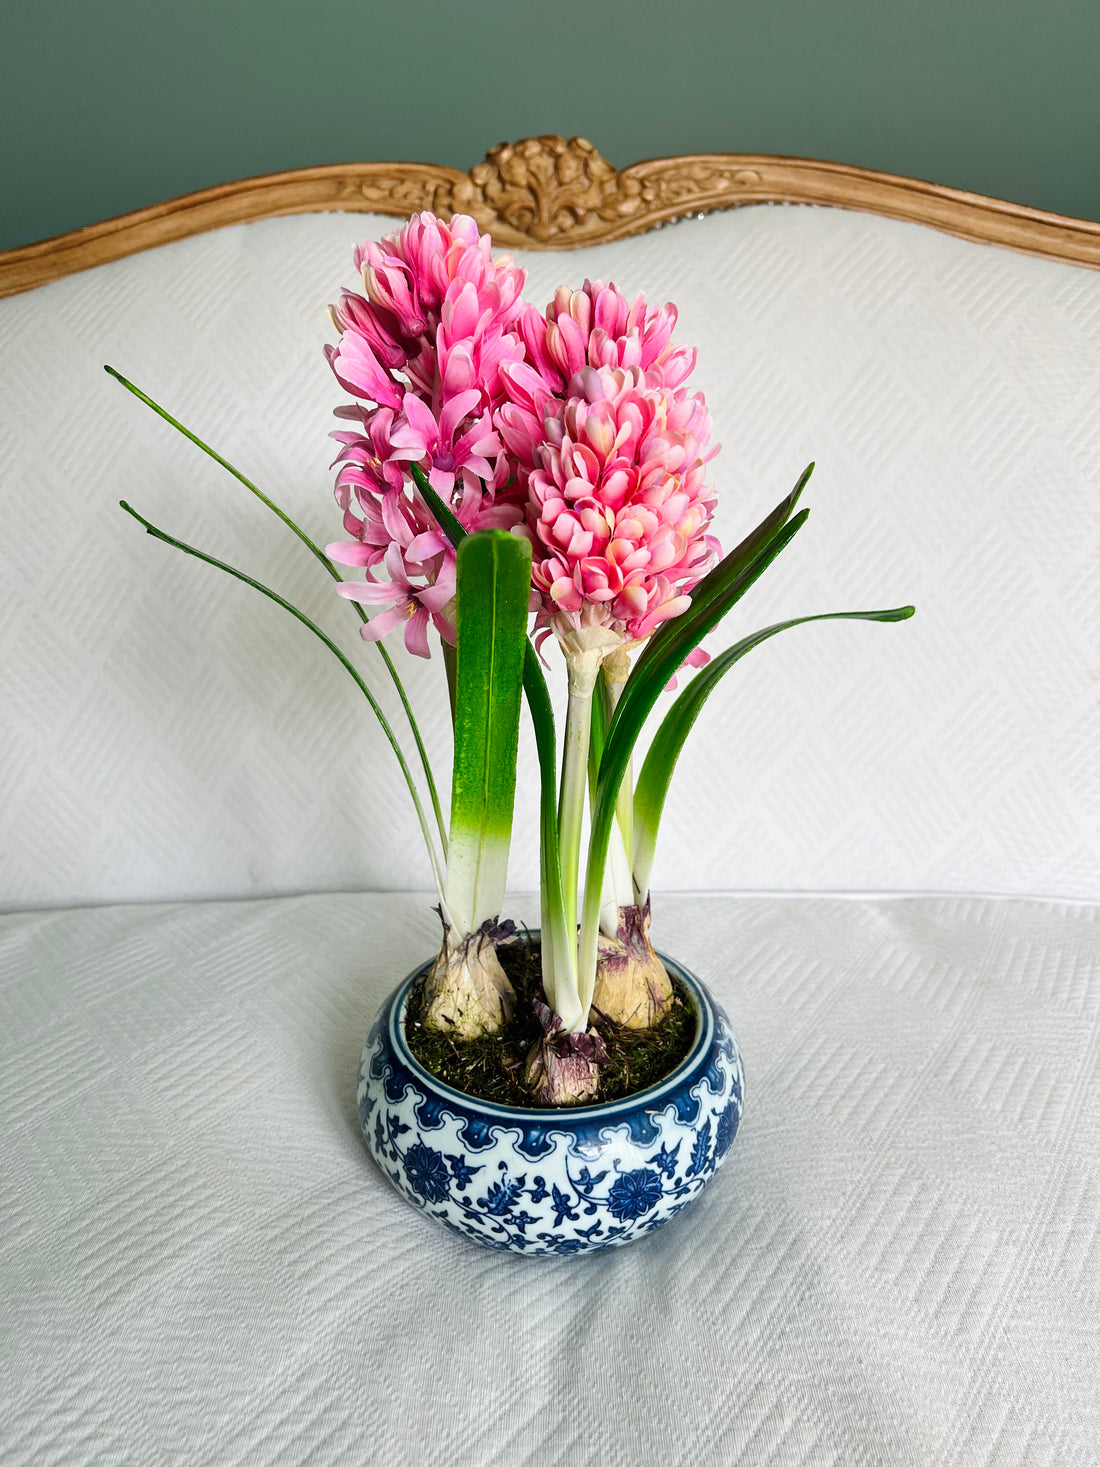 Faux Hyacinth bulbs in blue and white chinoiserie planter